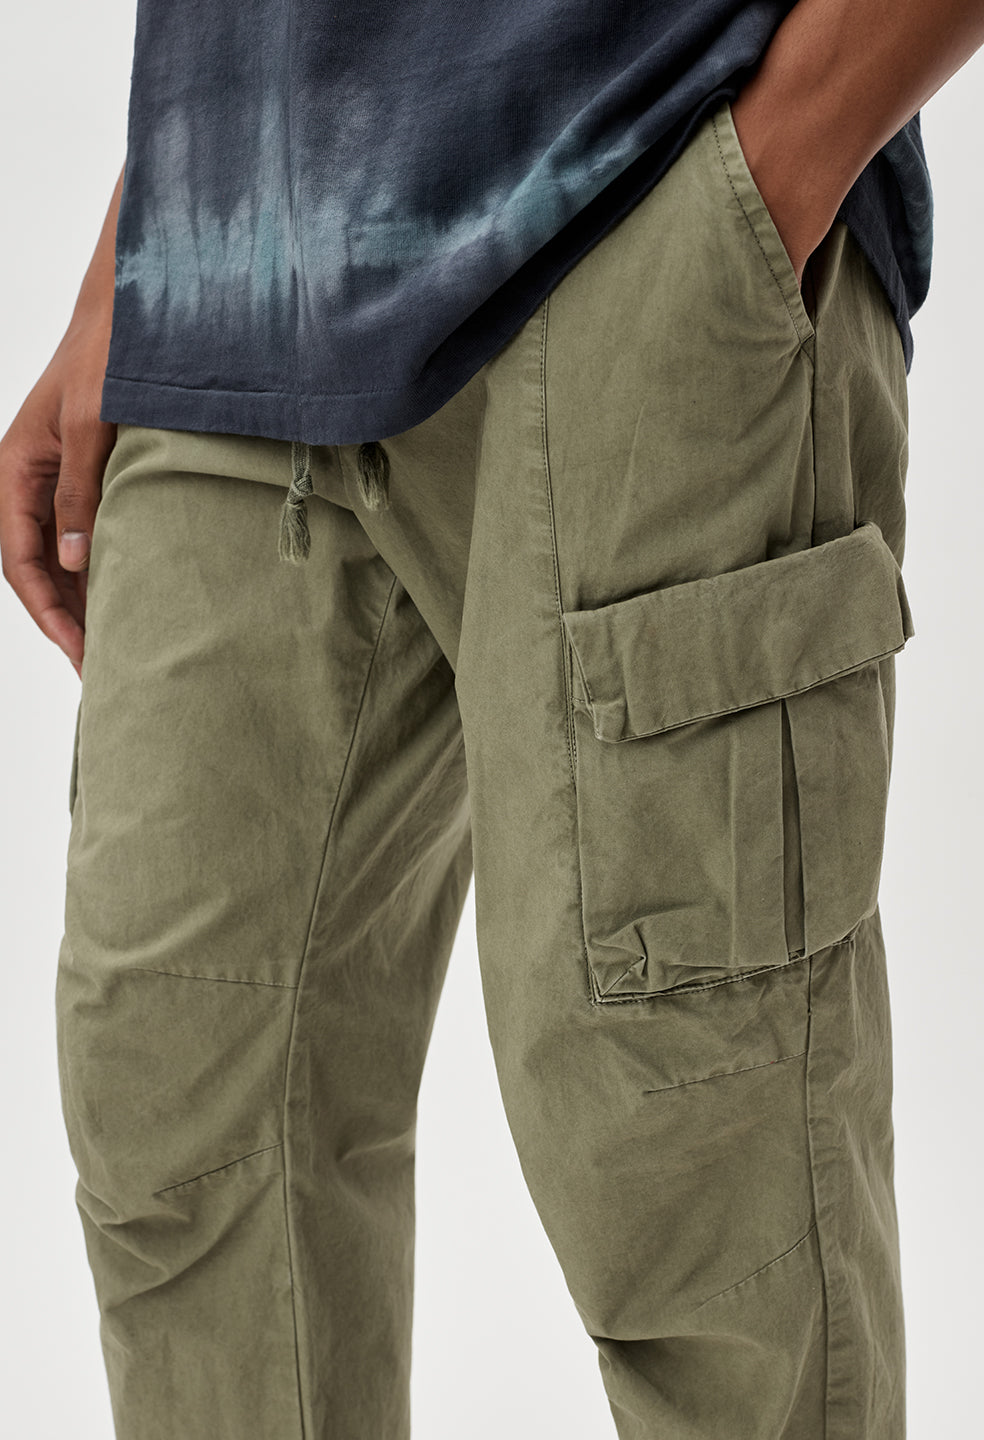 The. Slim Foundation Chino Pant in Organic Olive Green | Men's Pants |  Taylor Stitch